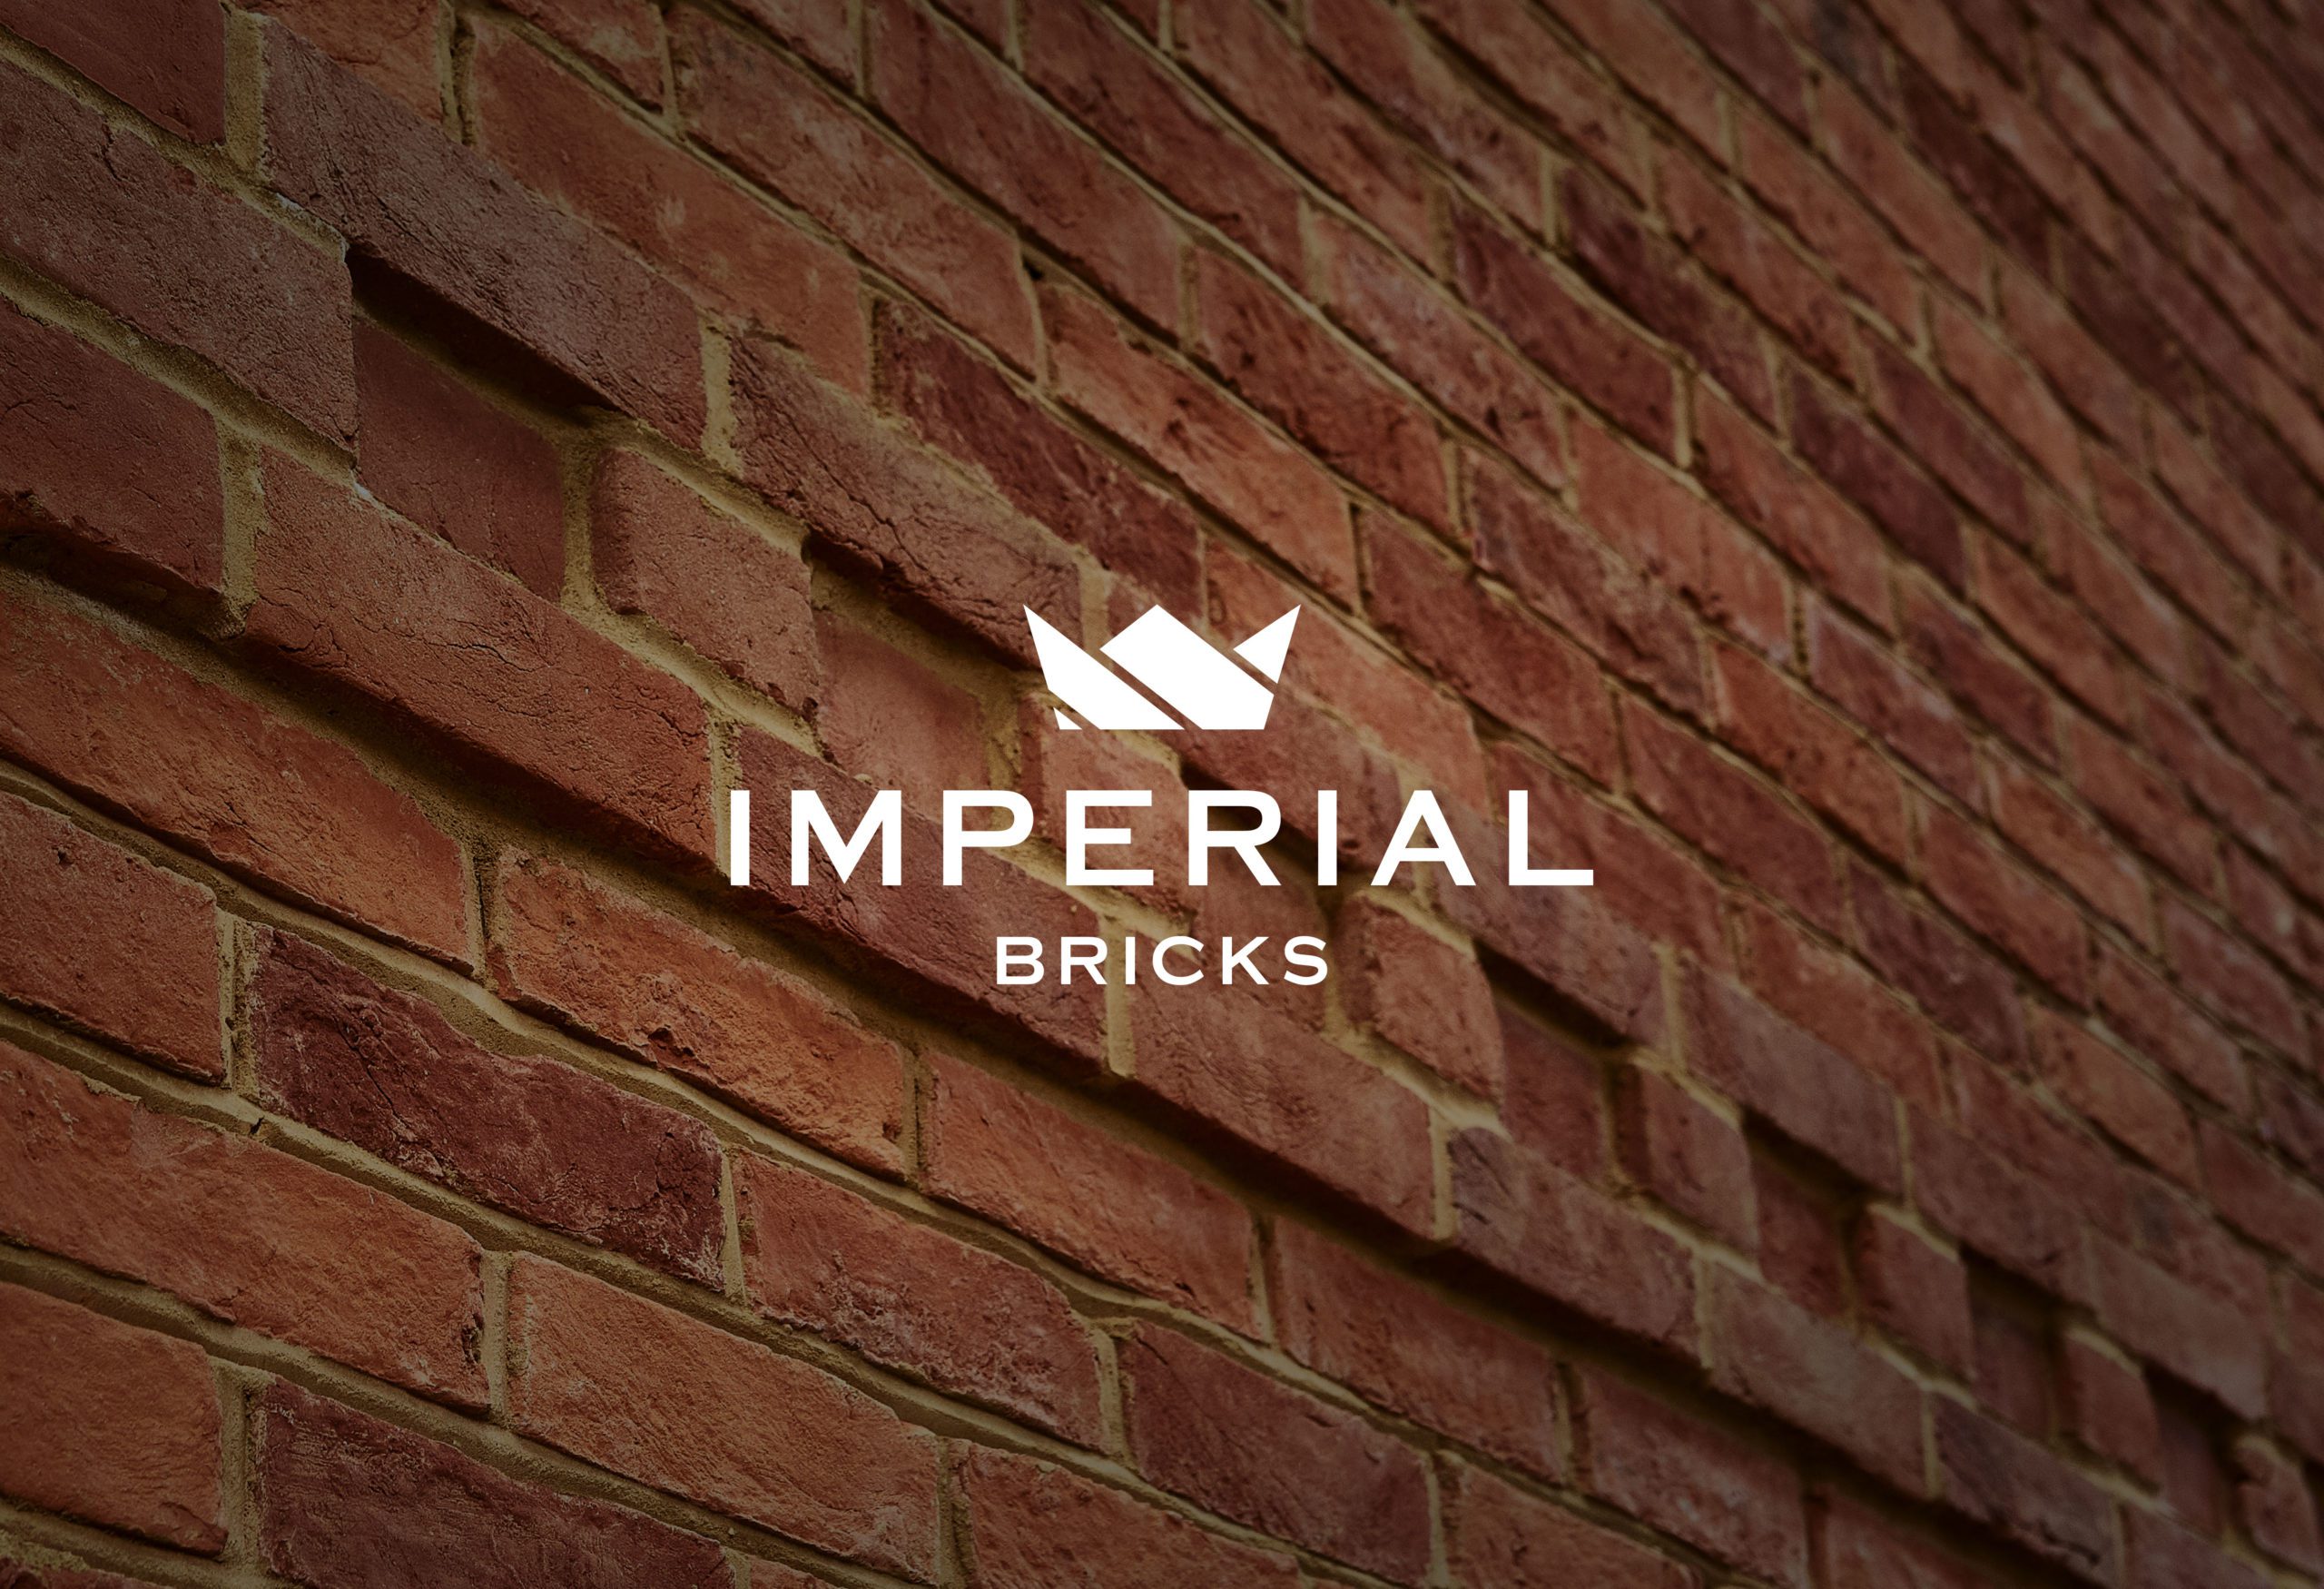 Building a new brand for Imperial Bricks